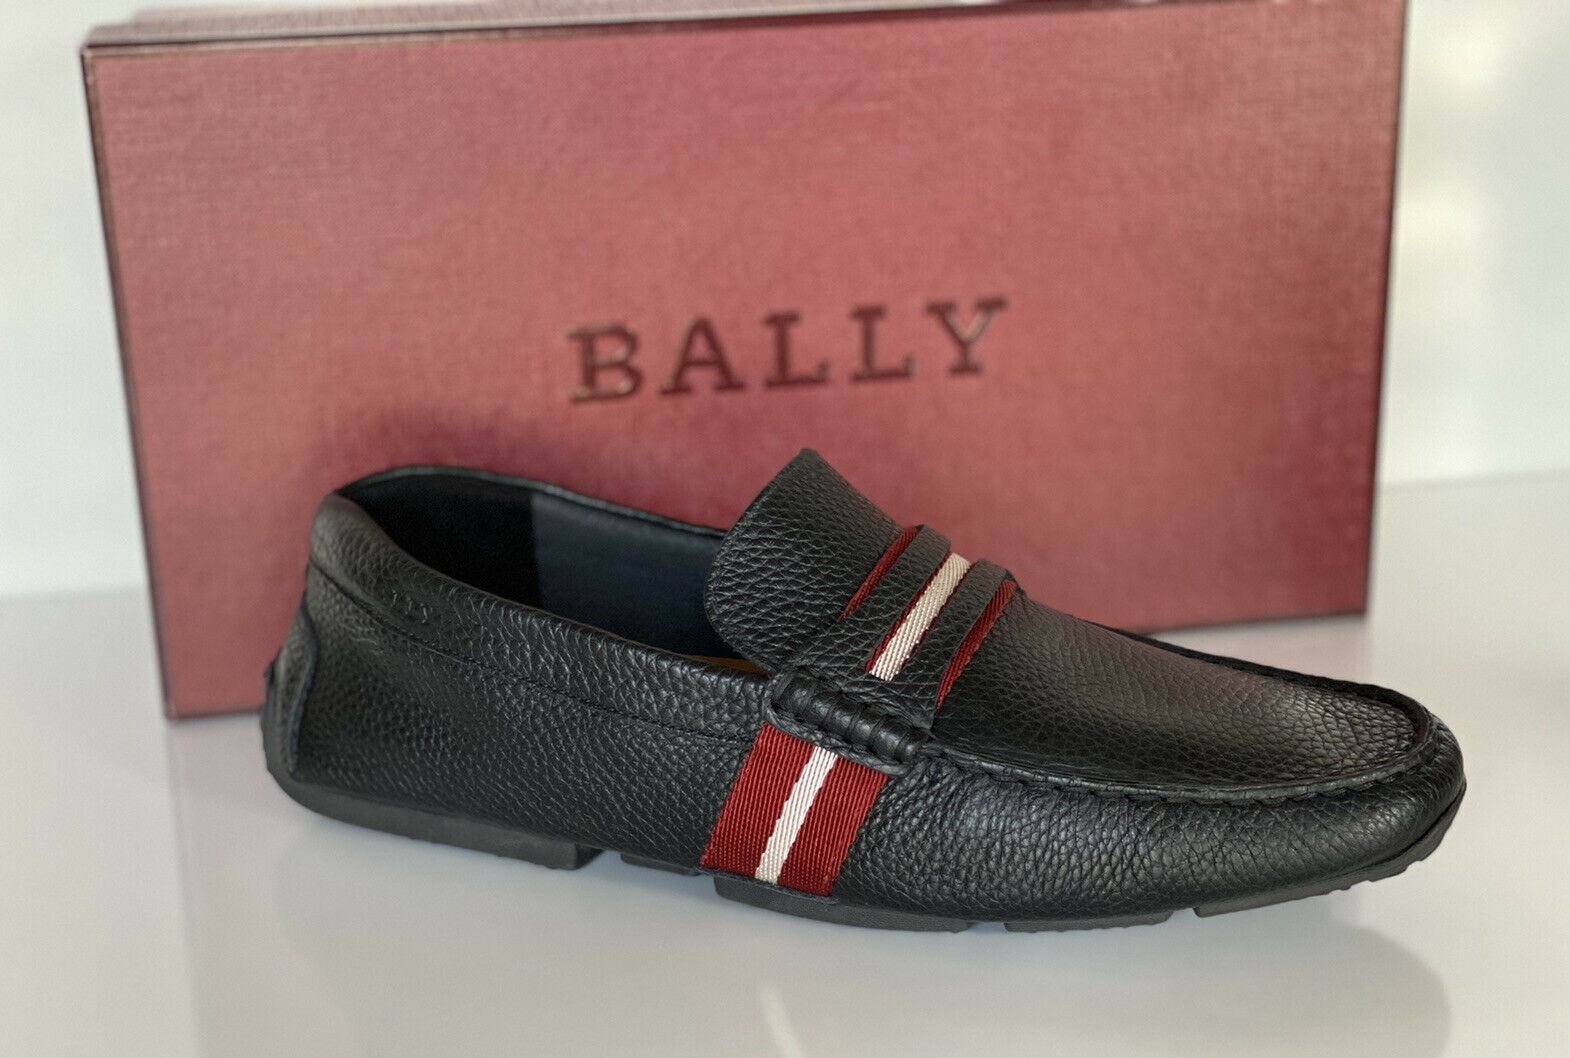 NIB Bally Mens Bovine Grained Leather Driver Shoes Black 9.5 D US 6228298 Italy